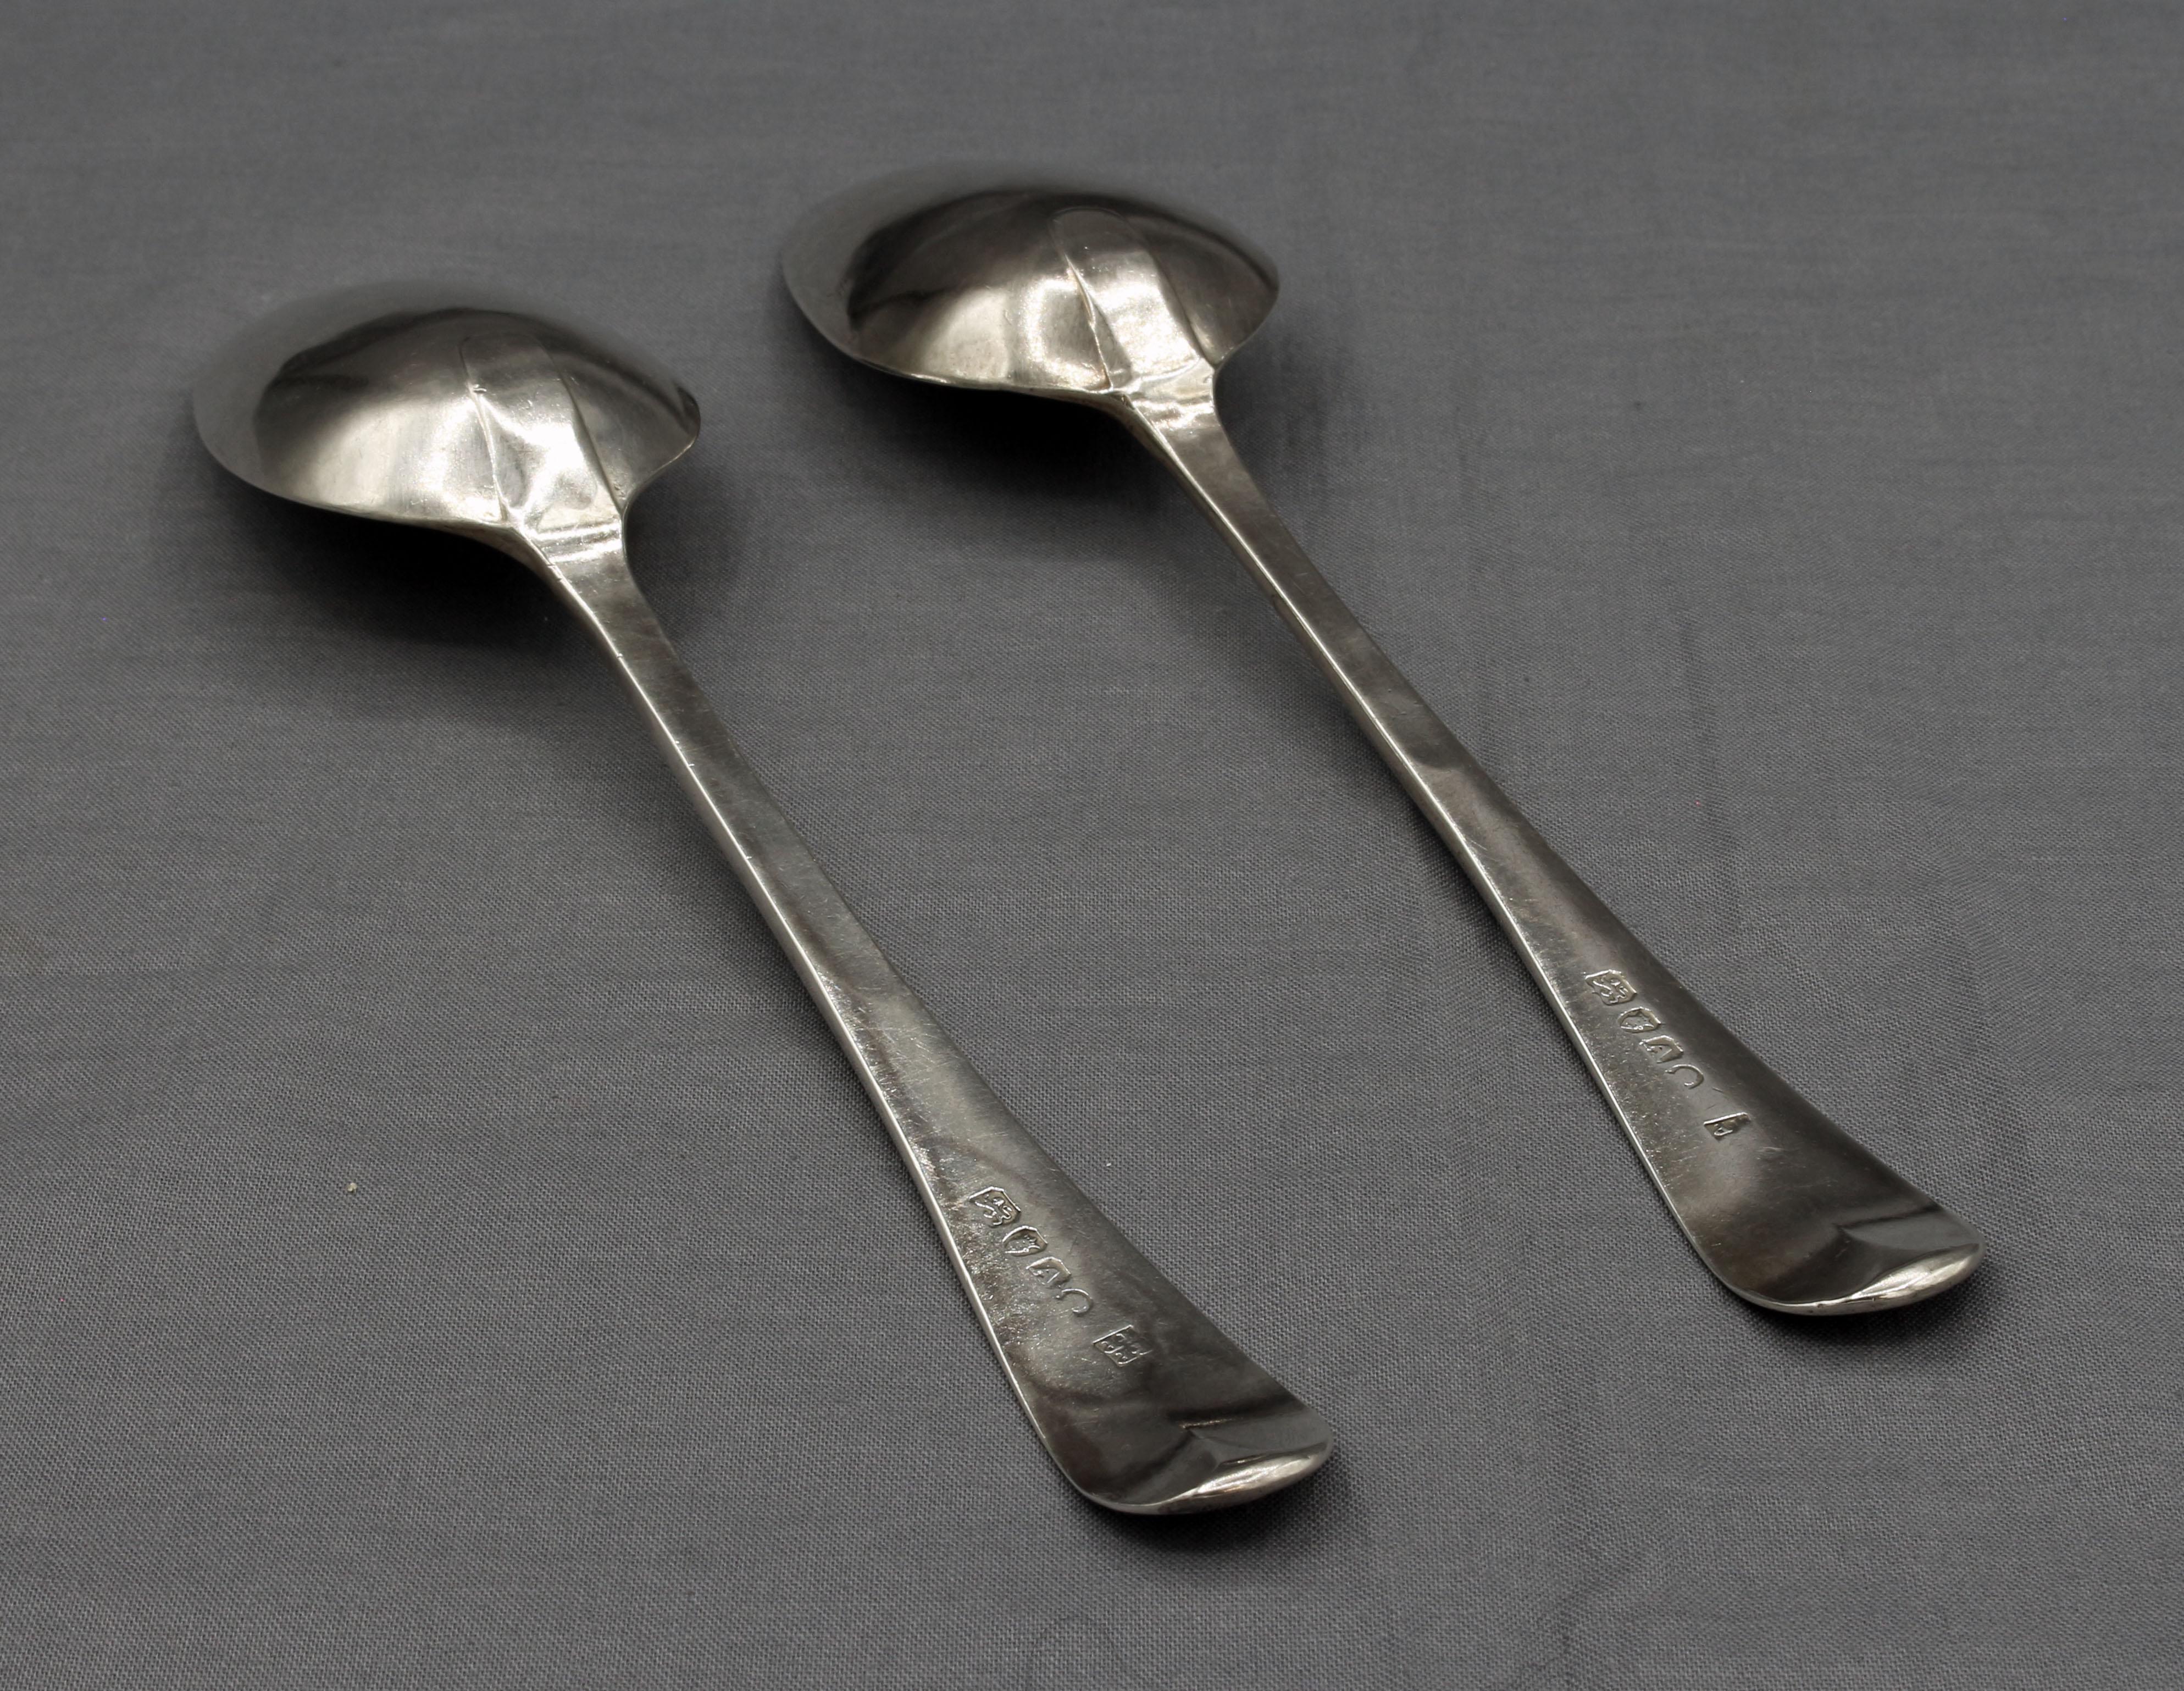 1796, London, pair of sterling silver Old English Engraved tablespoons by J&J Perkins. Jonathan I & II, 1795-1800 partnership. Simple rattail remains. Crisp period monogram 